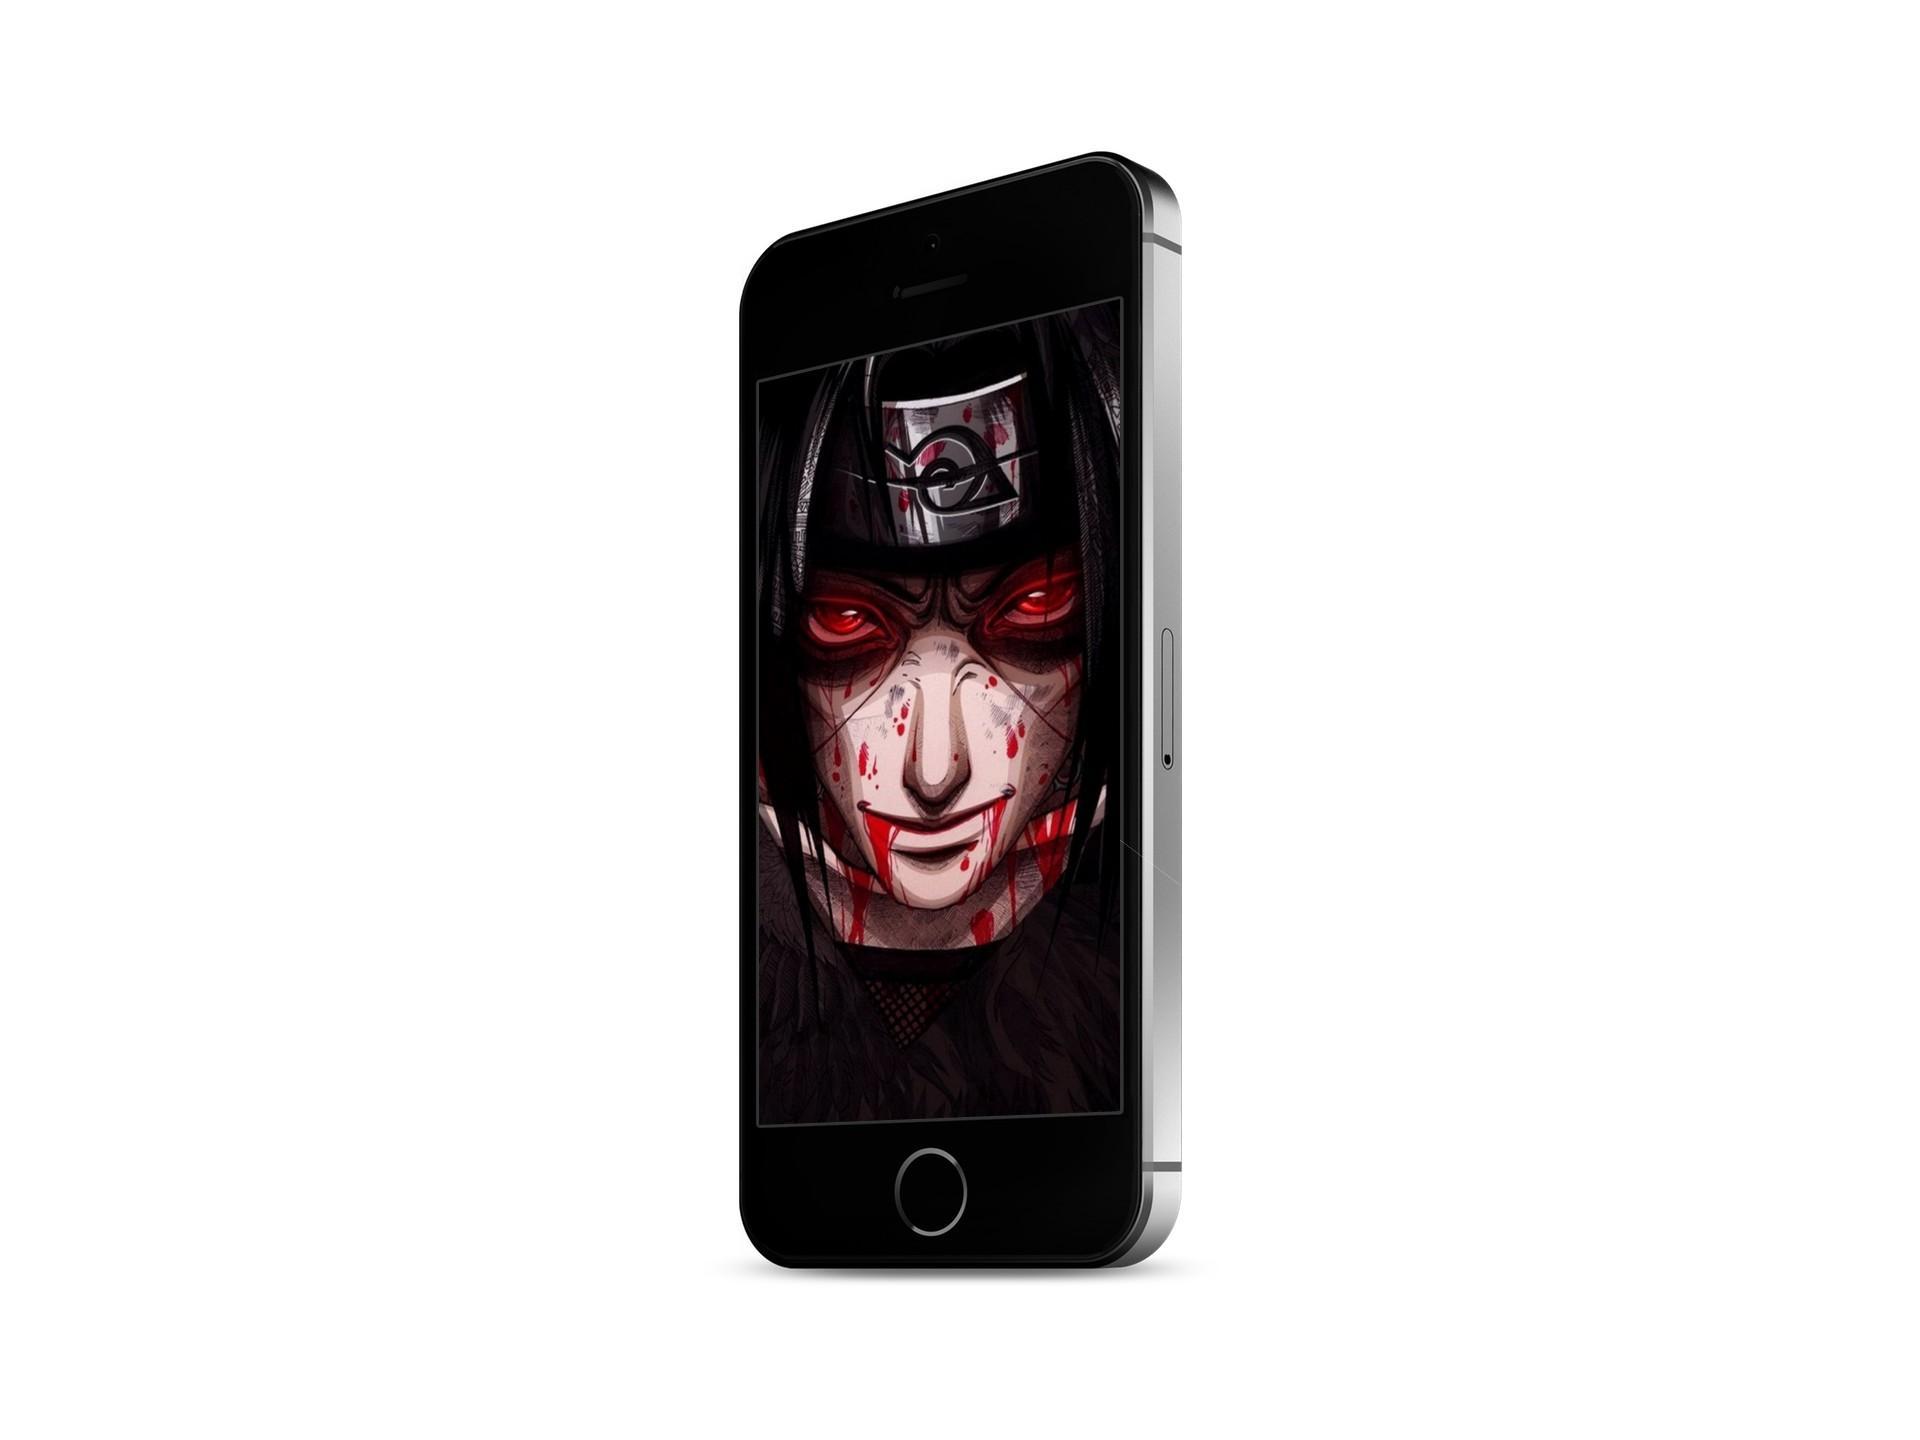  Itachi  Uchiha Wallpapers  HD 4K  for Android APK Download